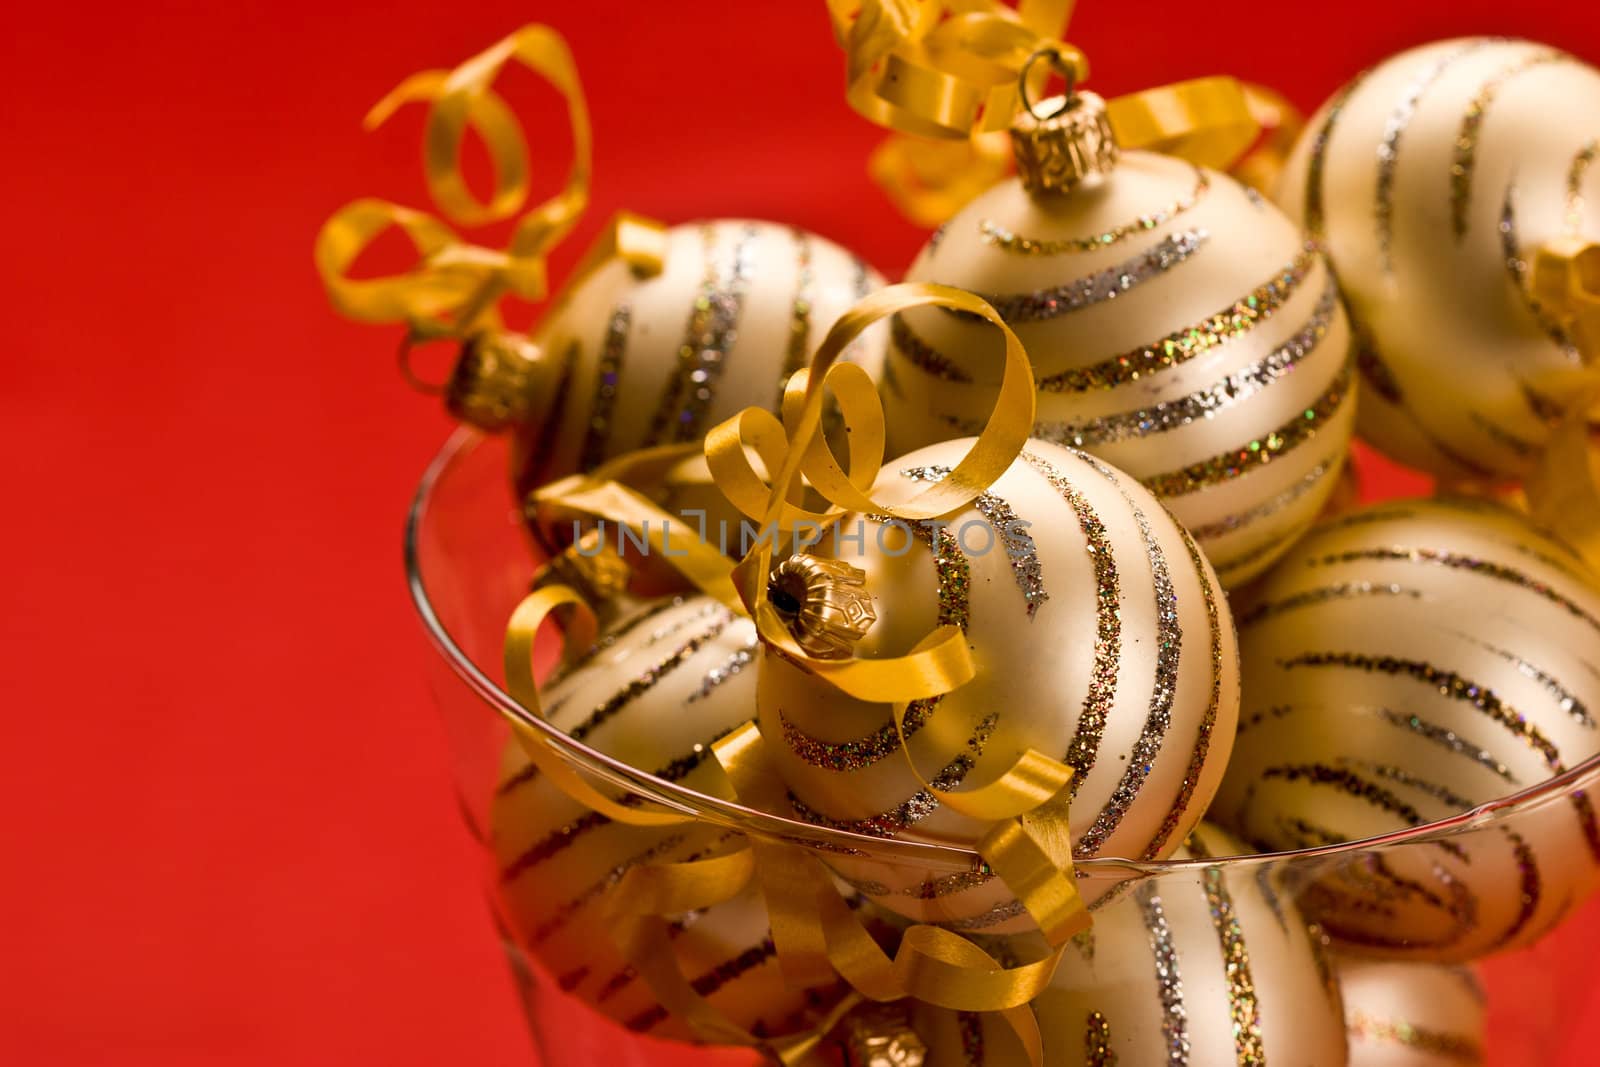 holiday series: some golden christms ball over red background